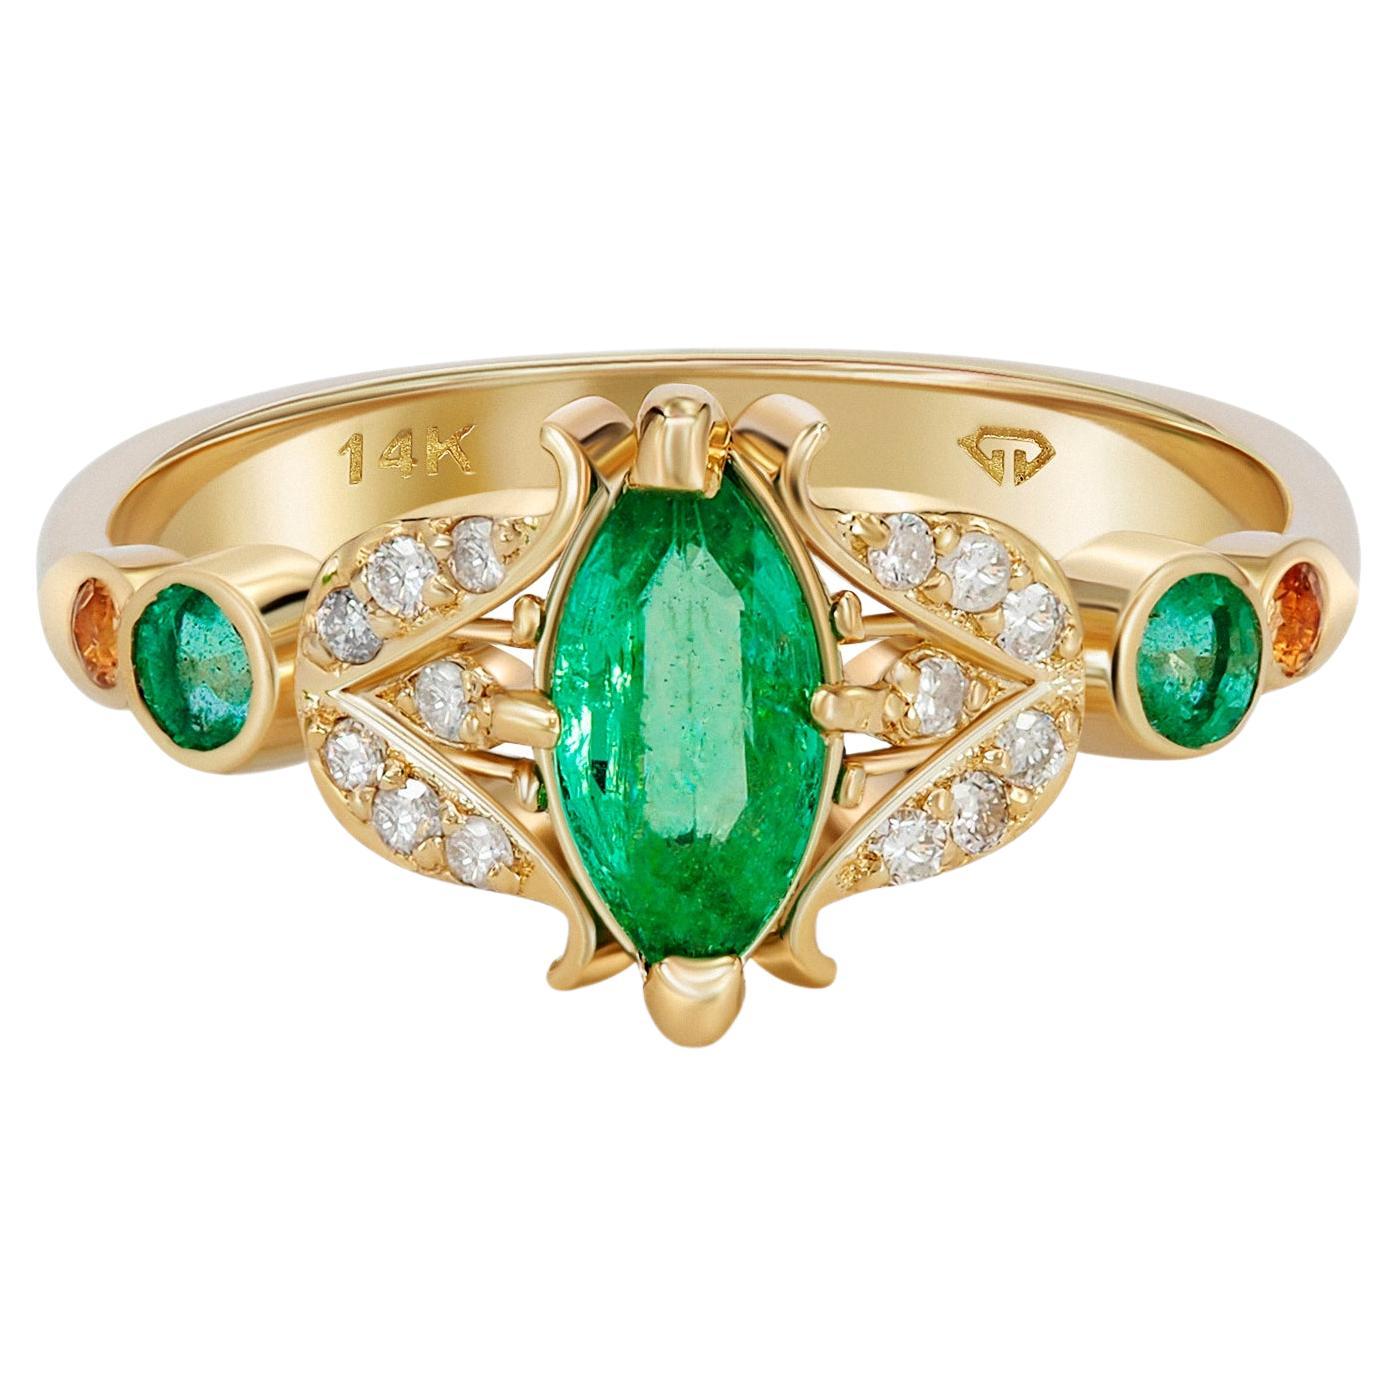 Vintage ring with emerald. 